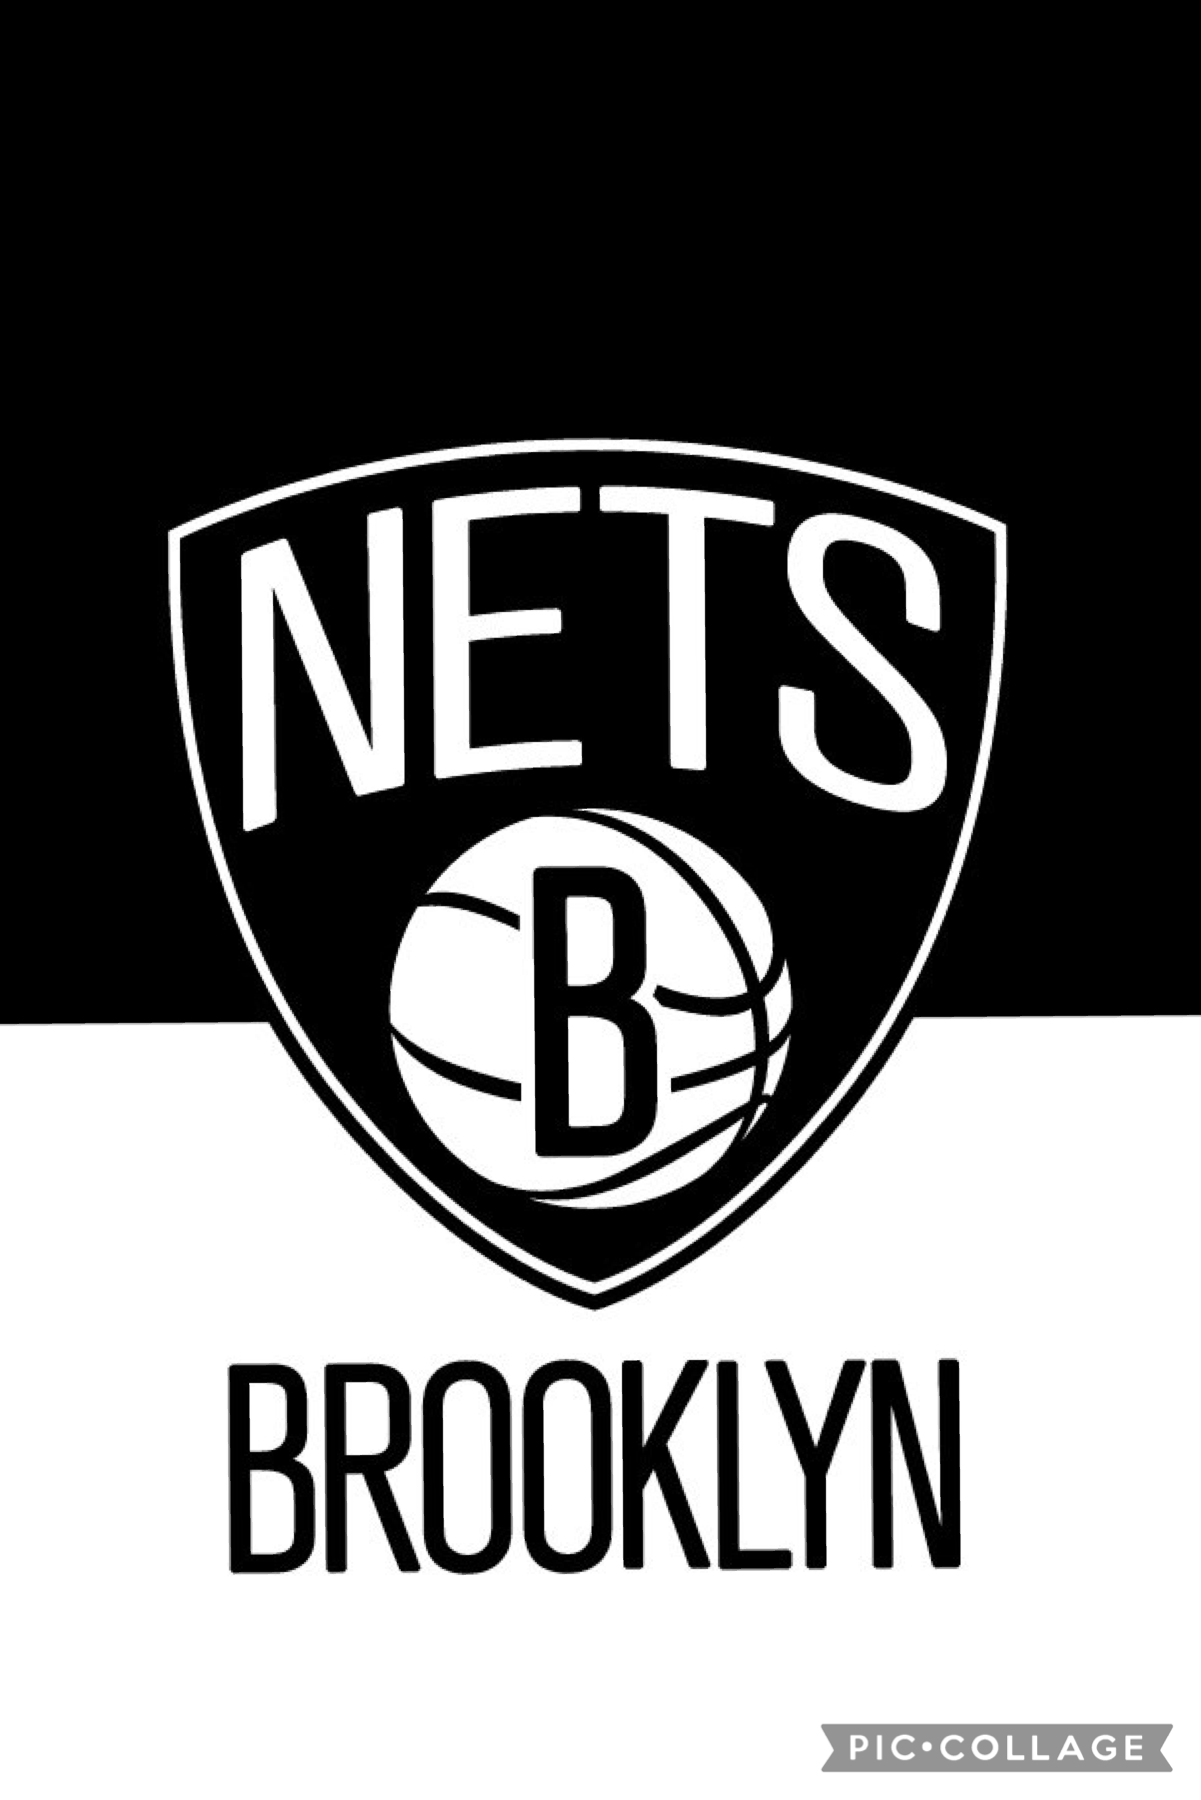 Brooklyn nets#Kylie and kevin